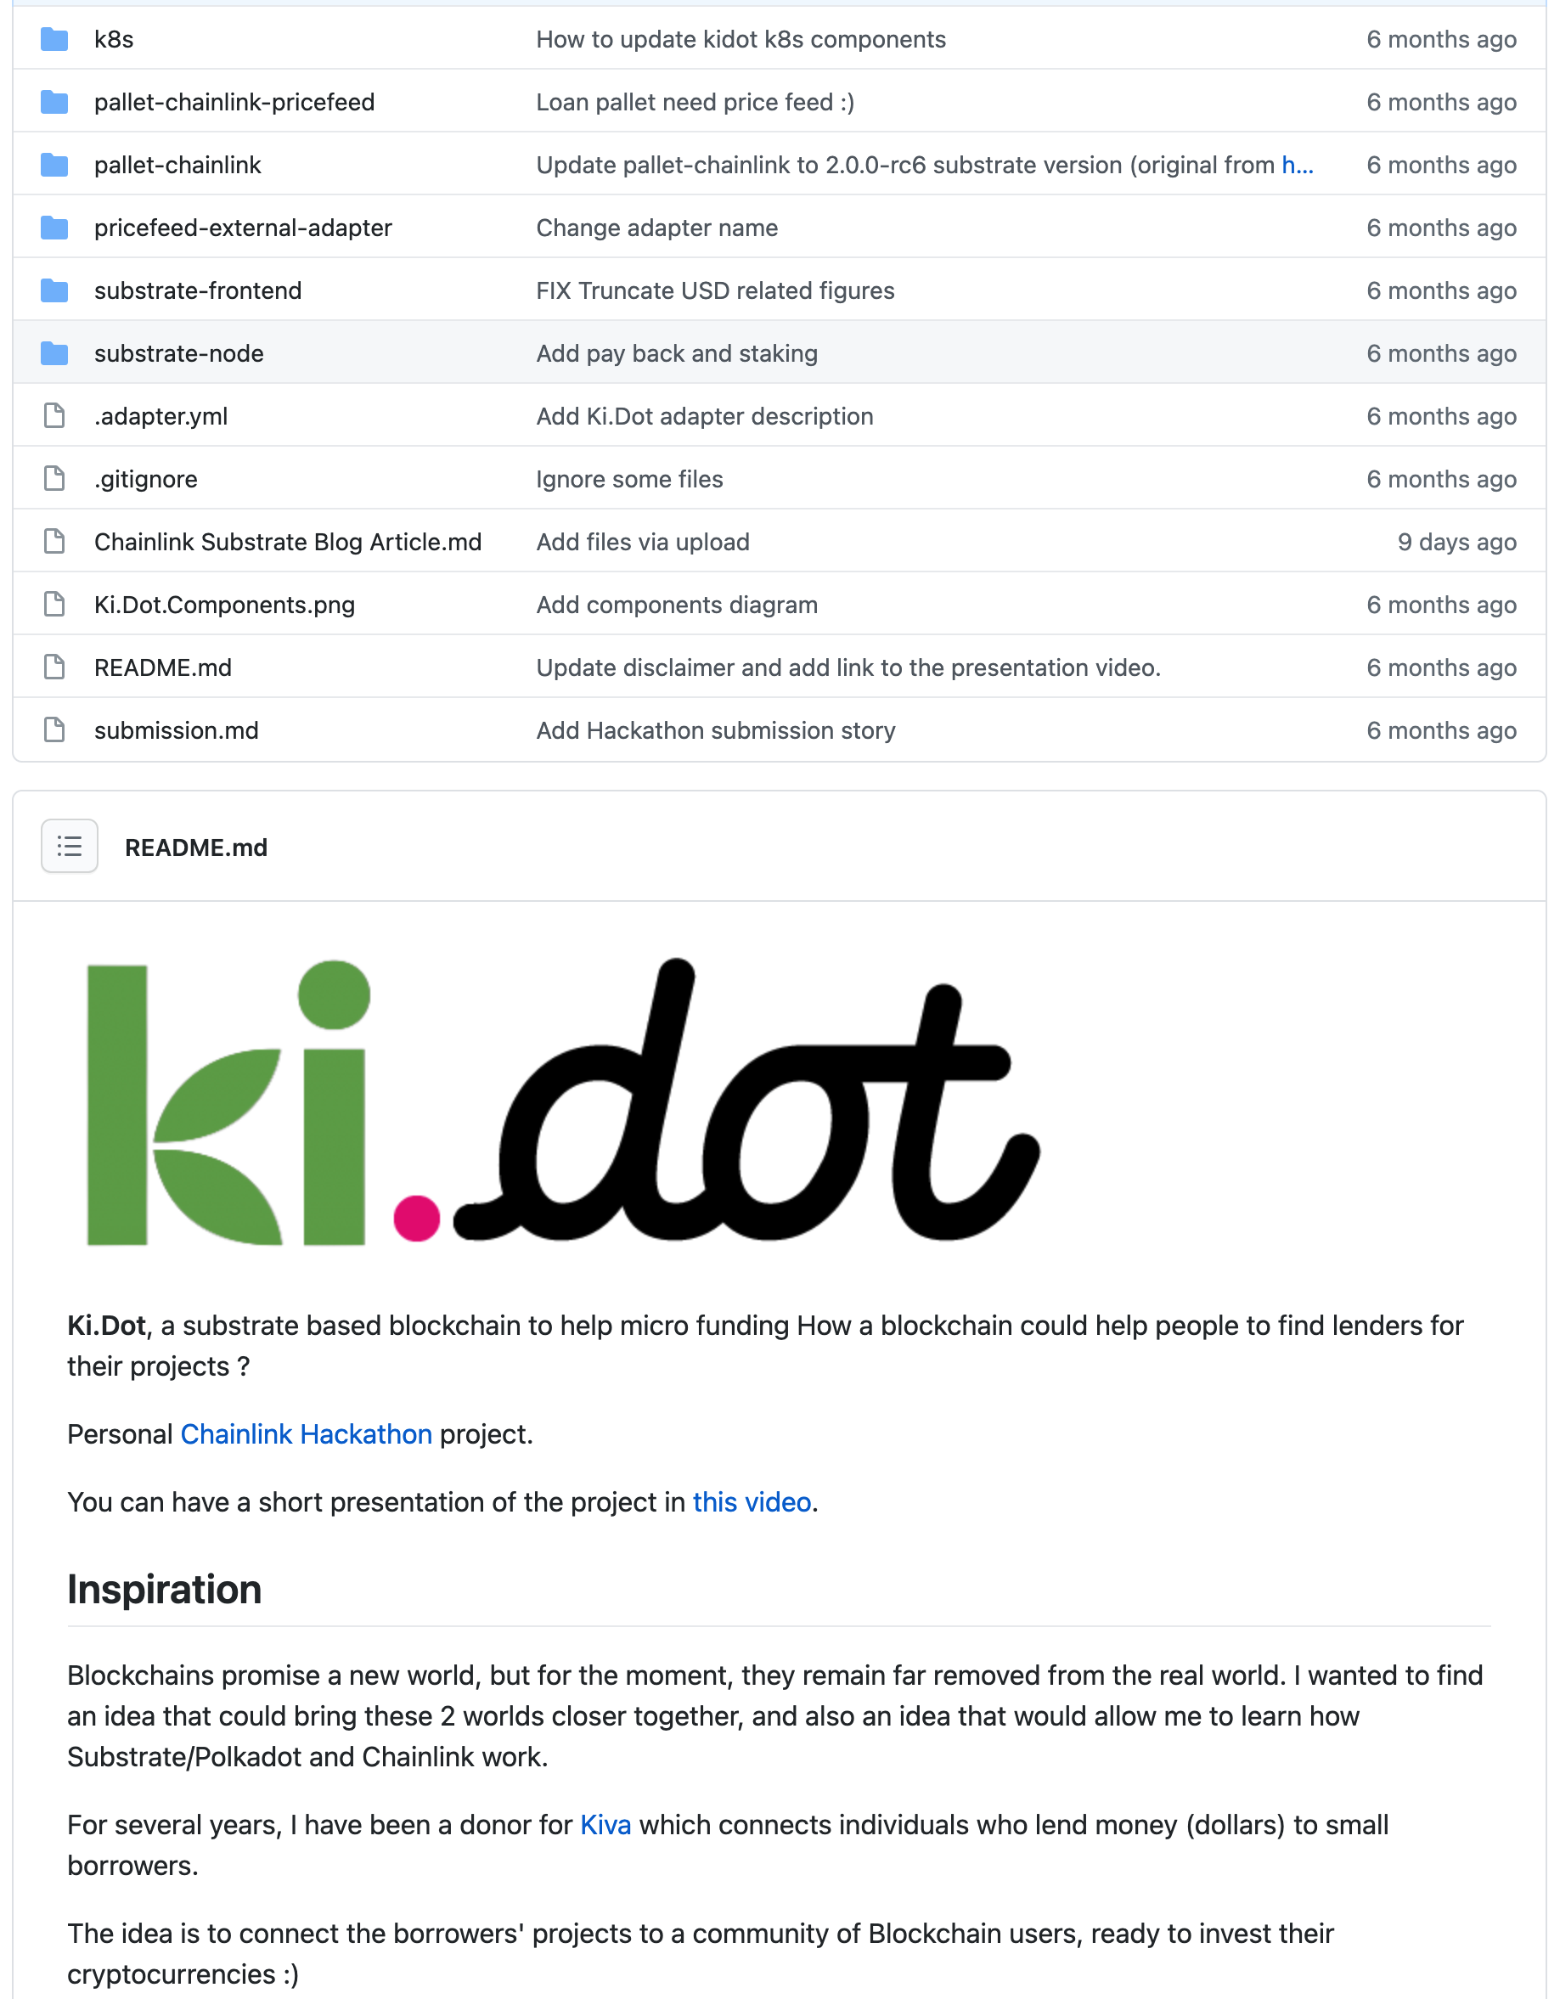 Ki.Dot, runner-up prize winner in the 2020 Chainlink Virtual Hackathon had a clean repository and well-presented README.